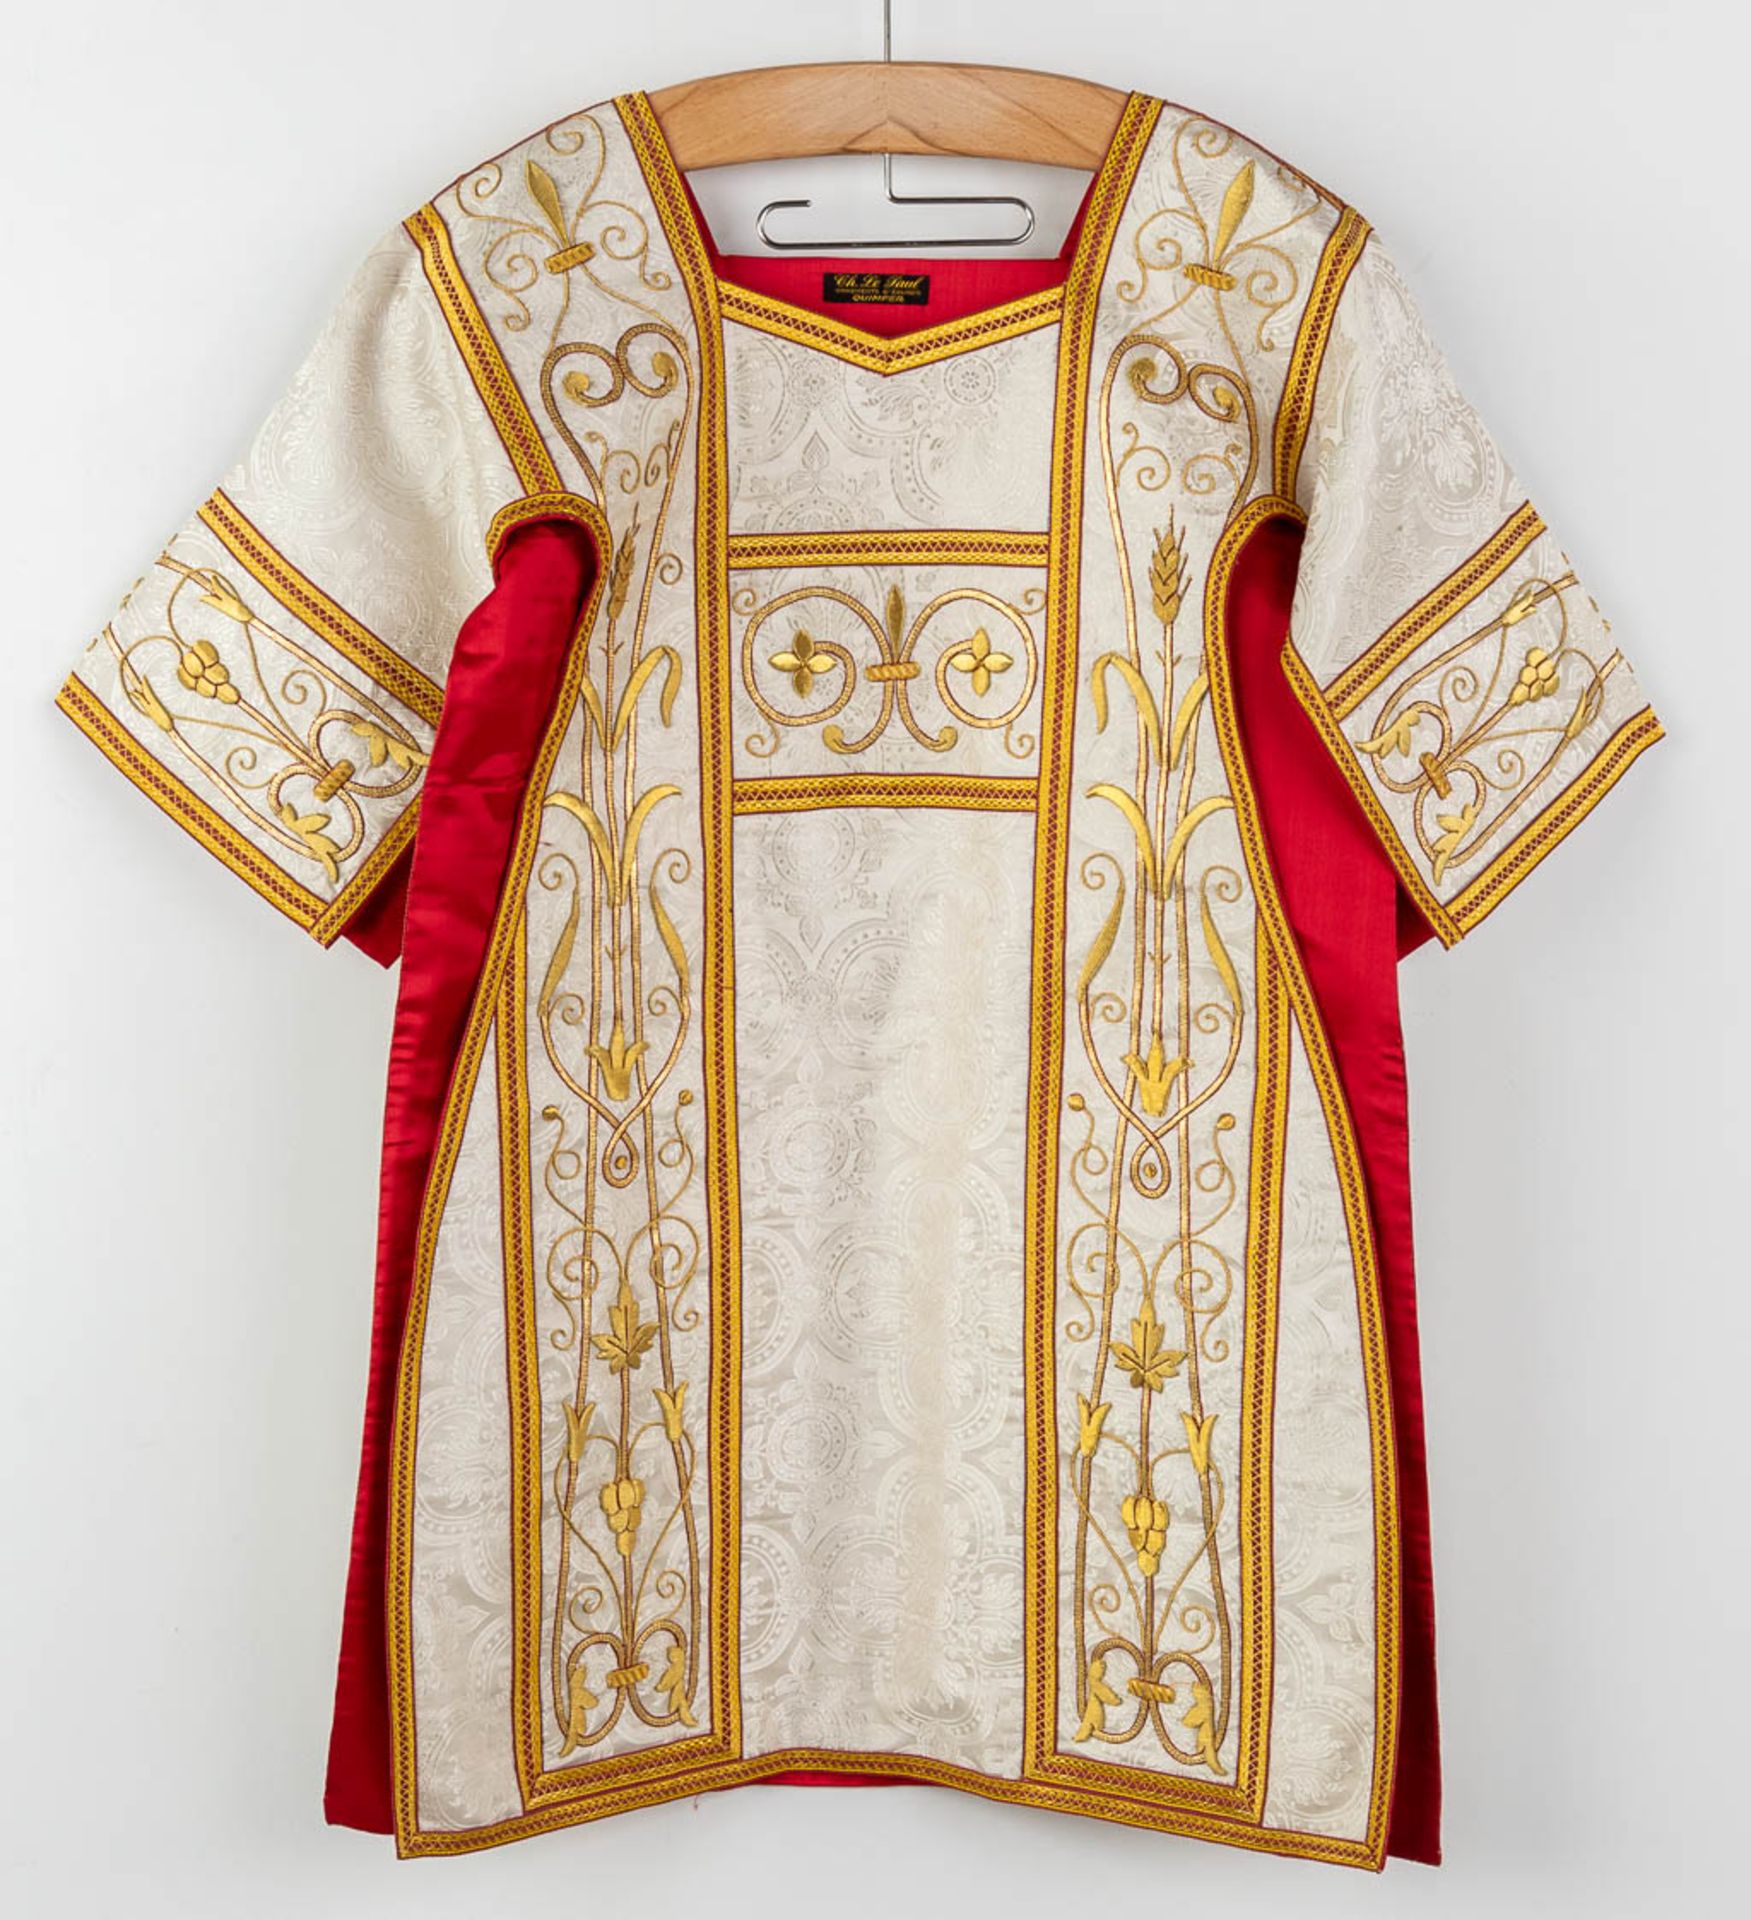 A matching set of Liturgical robes, 4 dalmatics, maniples and stola. - Image 11 of 17